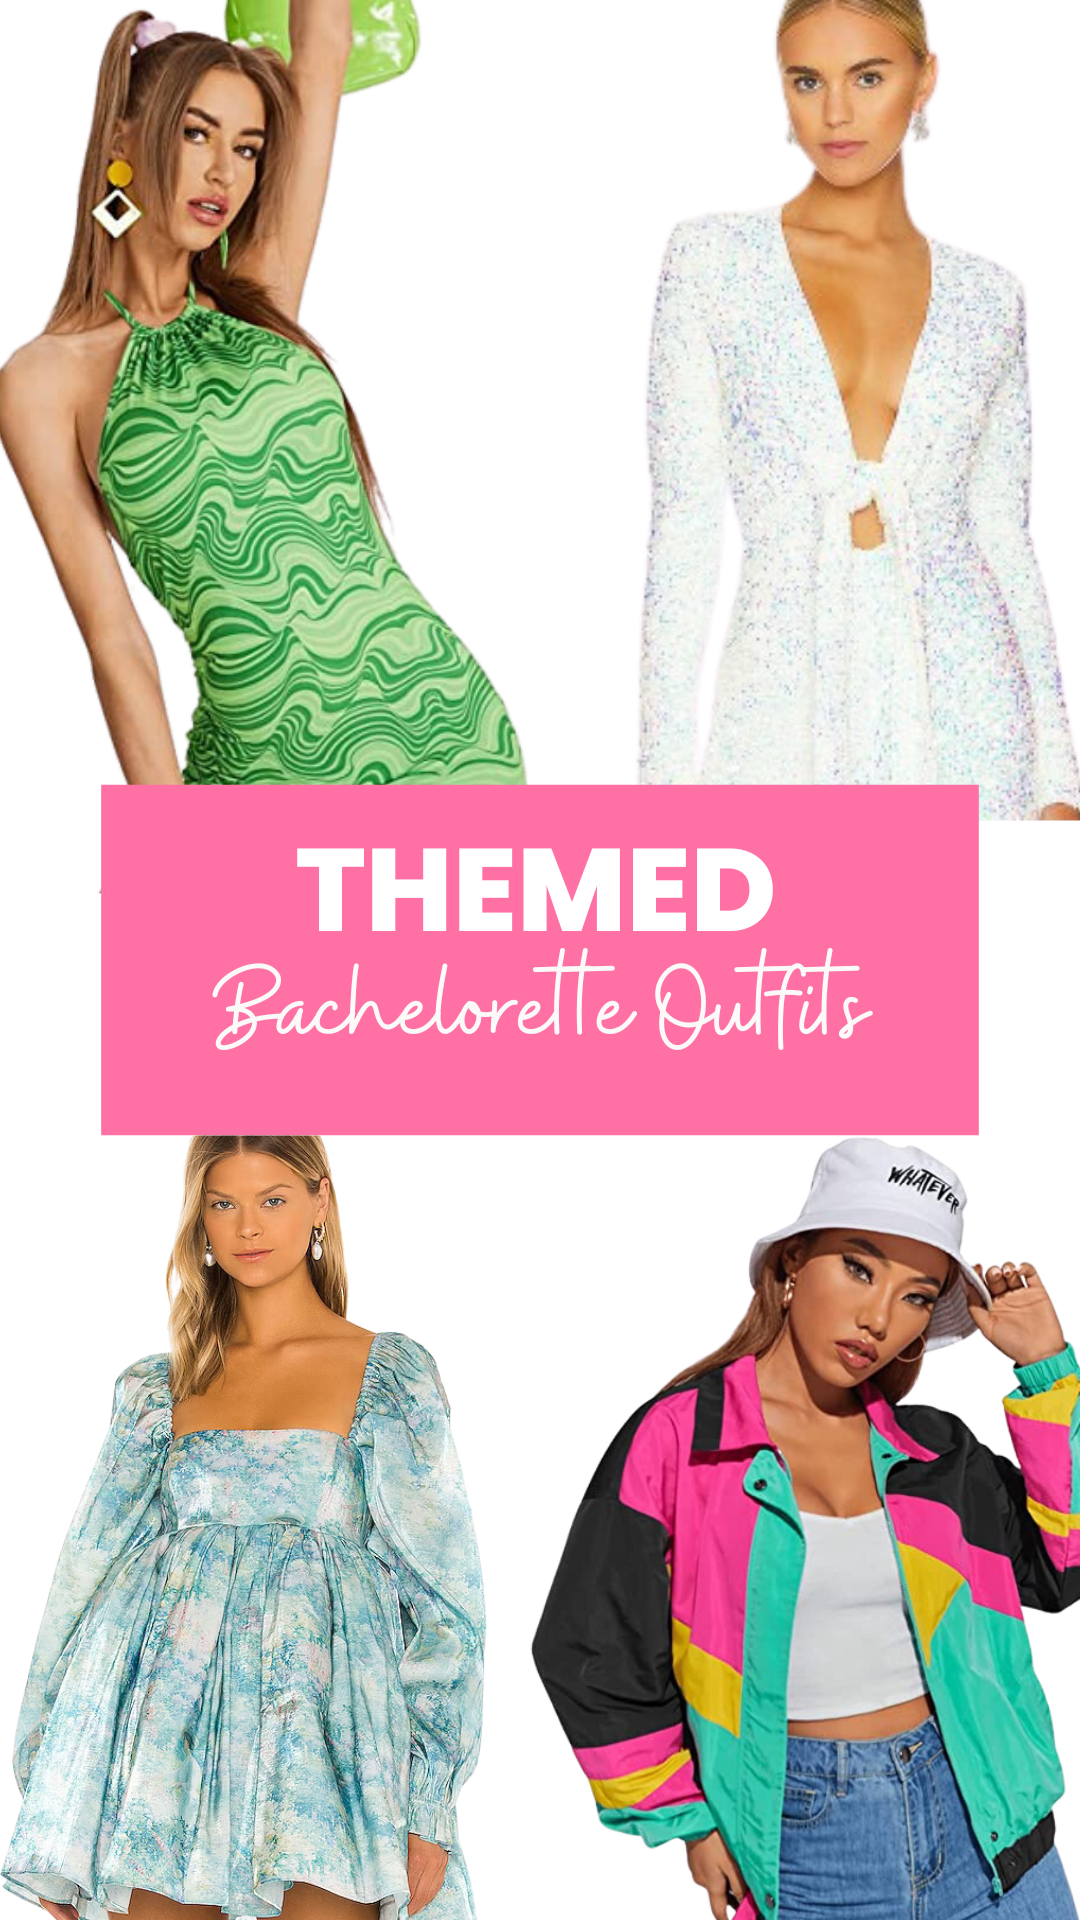 The Best Bachelorette Outfits by Theme - Bach Bride